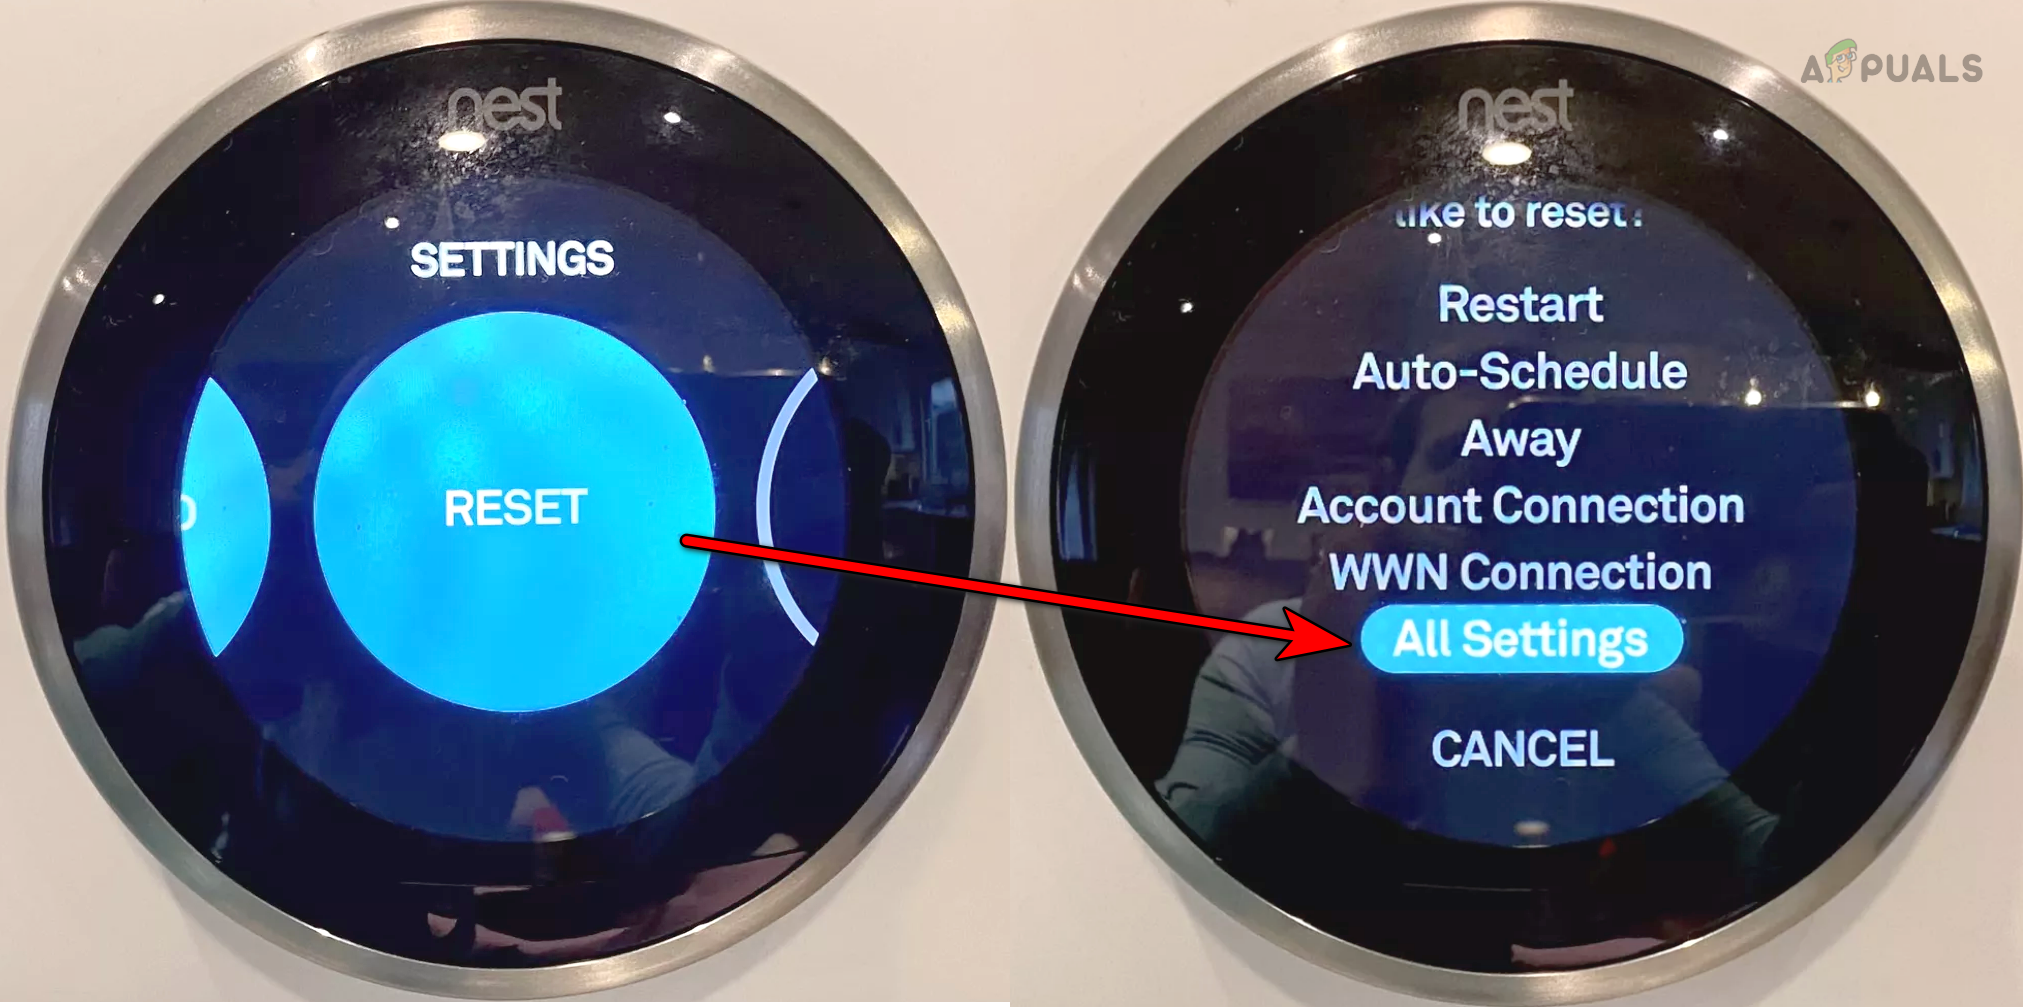 Reset All Settings on the Nest Thermostat